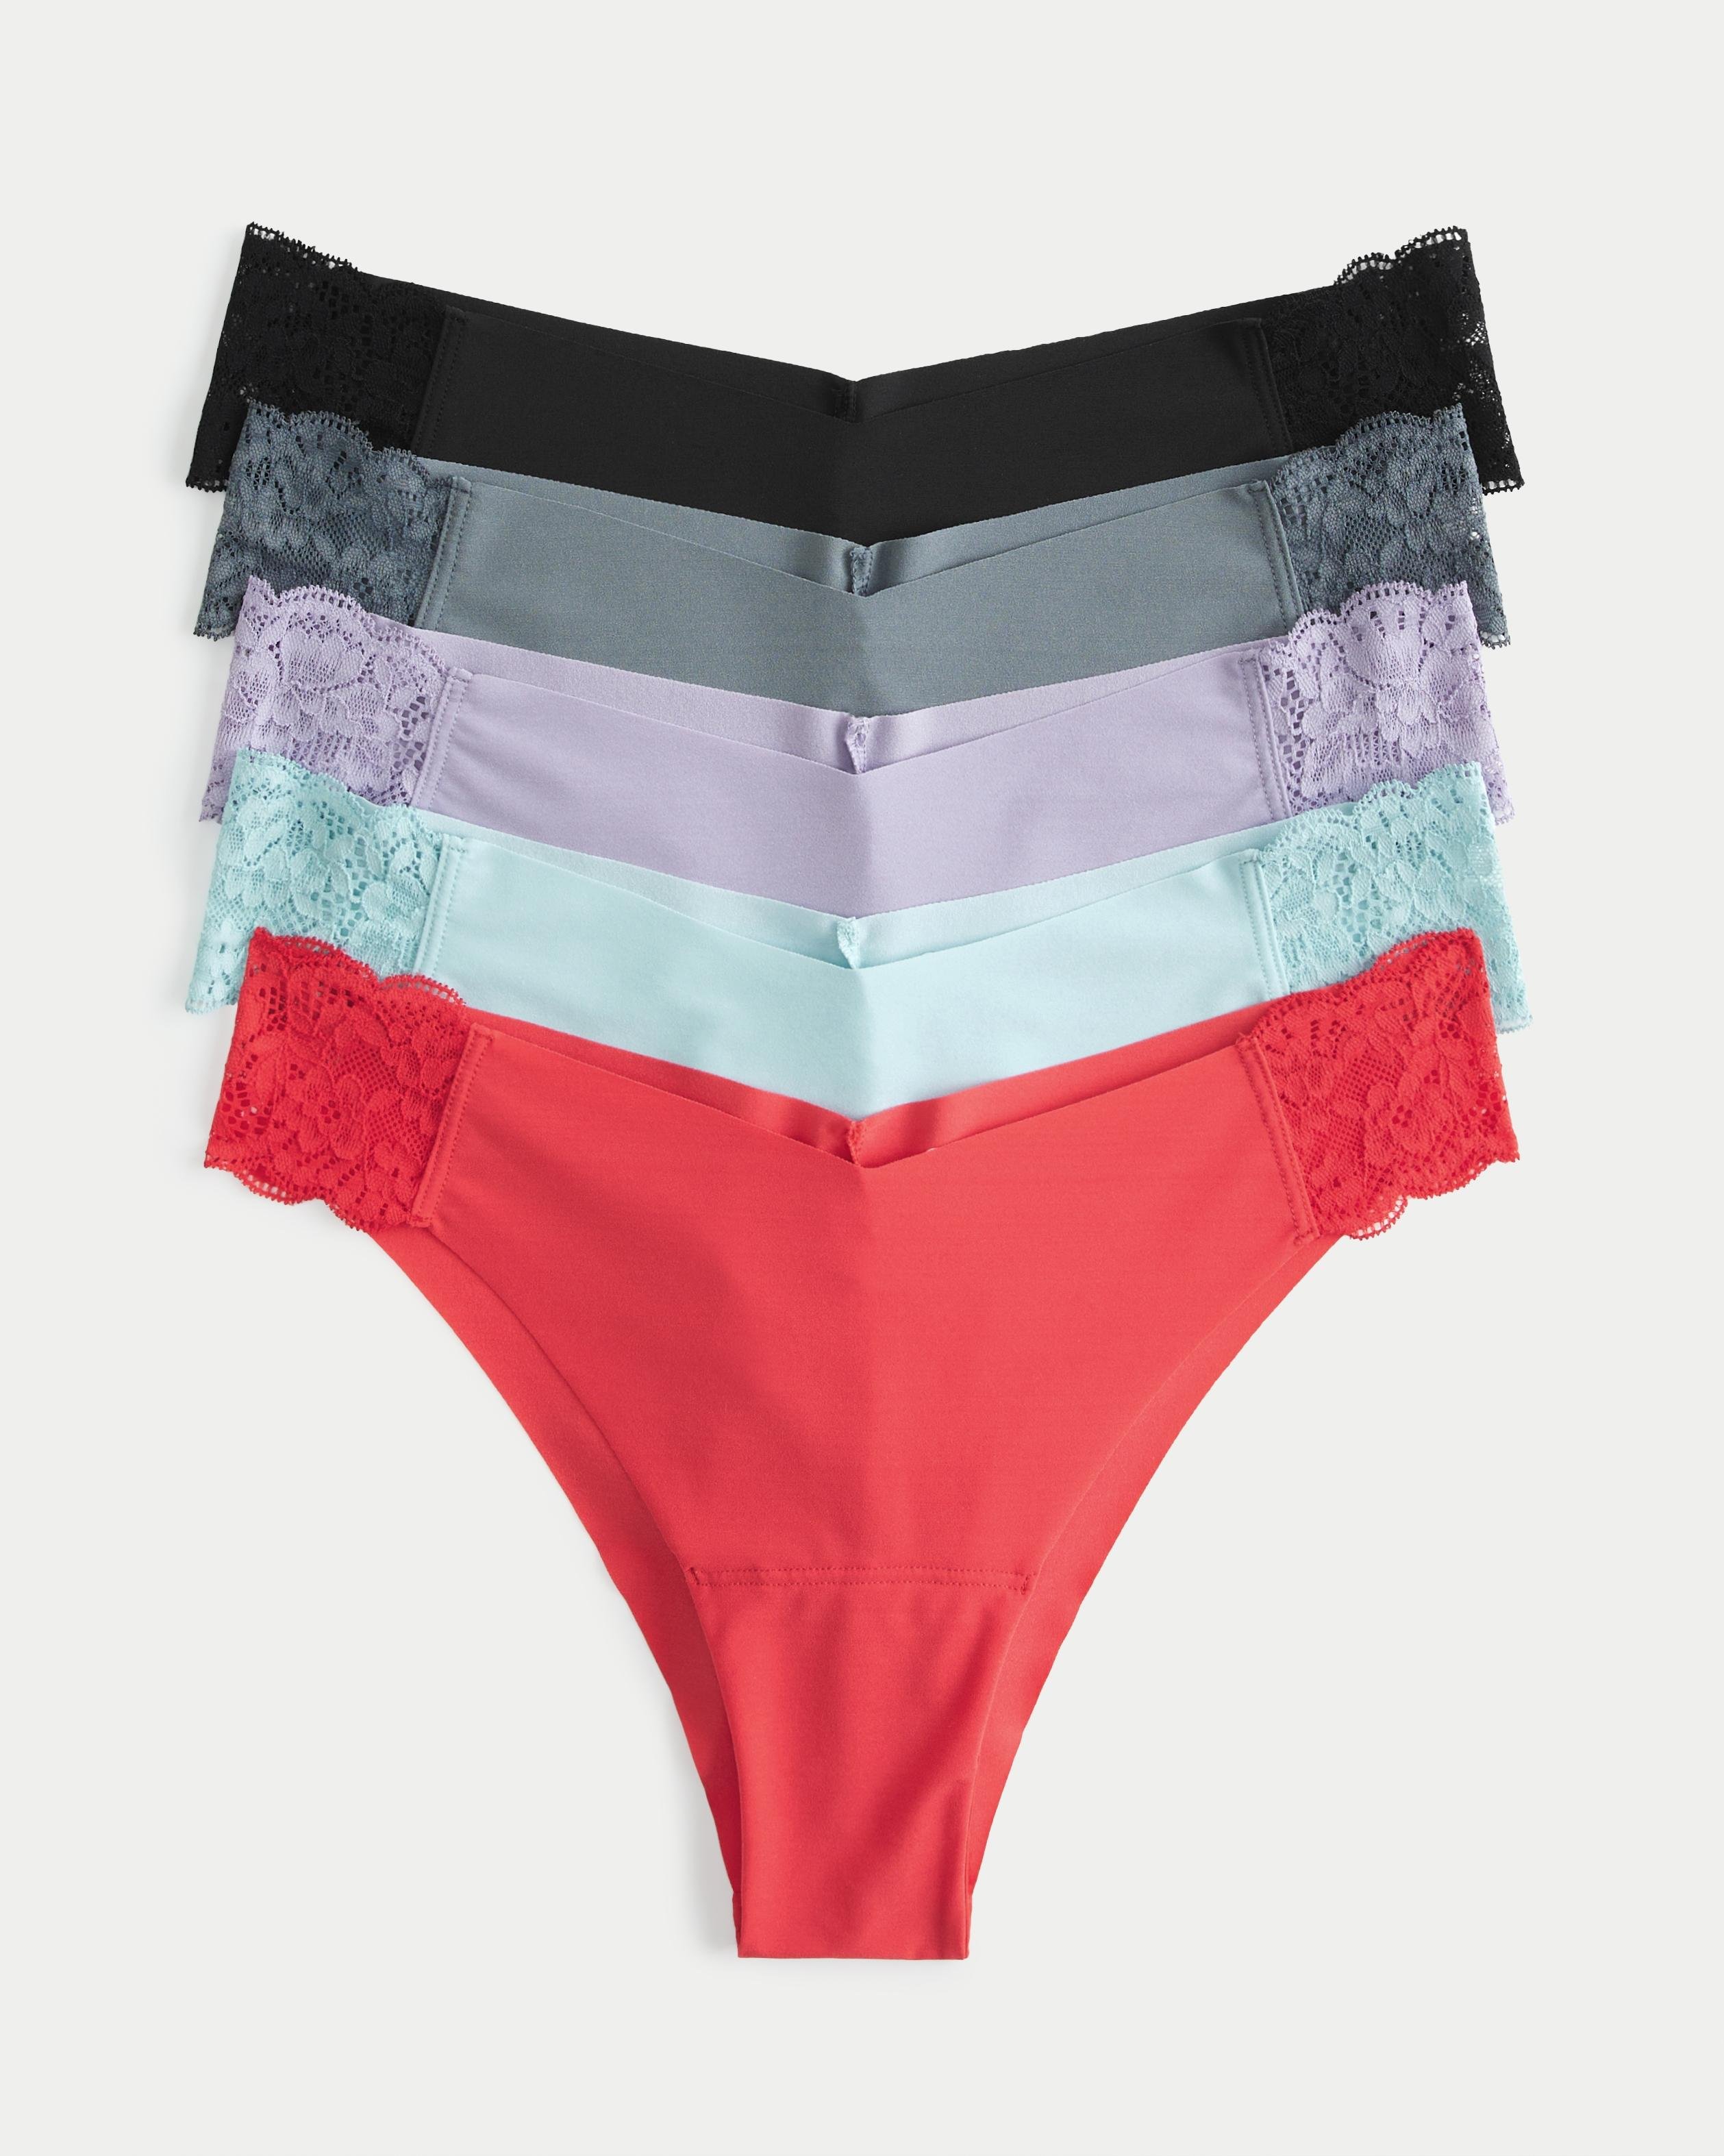 Hollister Gilly Hicks Lace-side No-show Cheeky Underwear 5-pack in